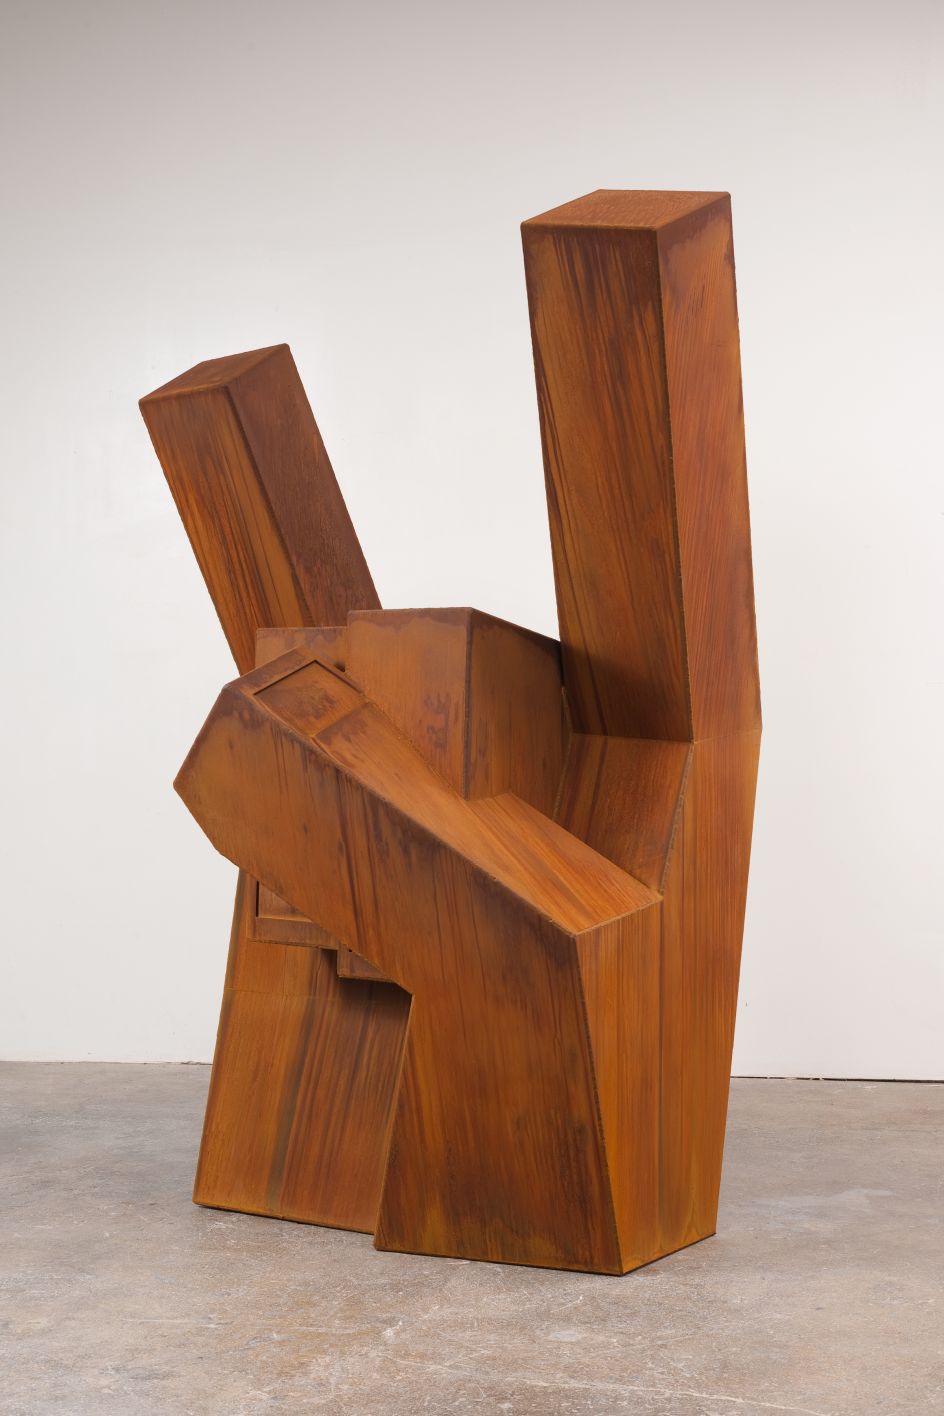 Nathan Mabry, Heavy Handed (2013), Weathering Steel, 210x150x120cm